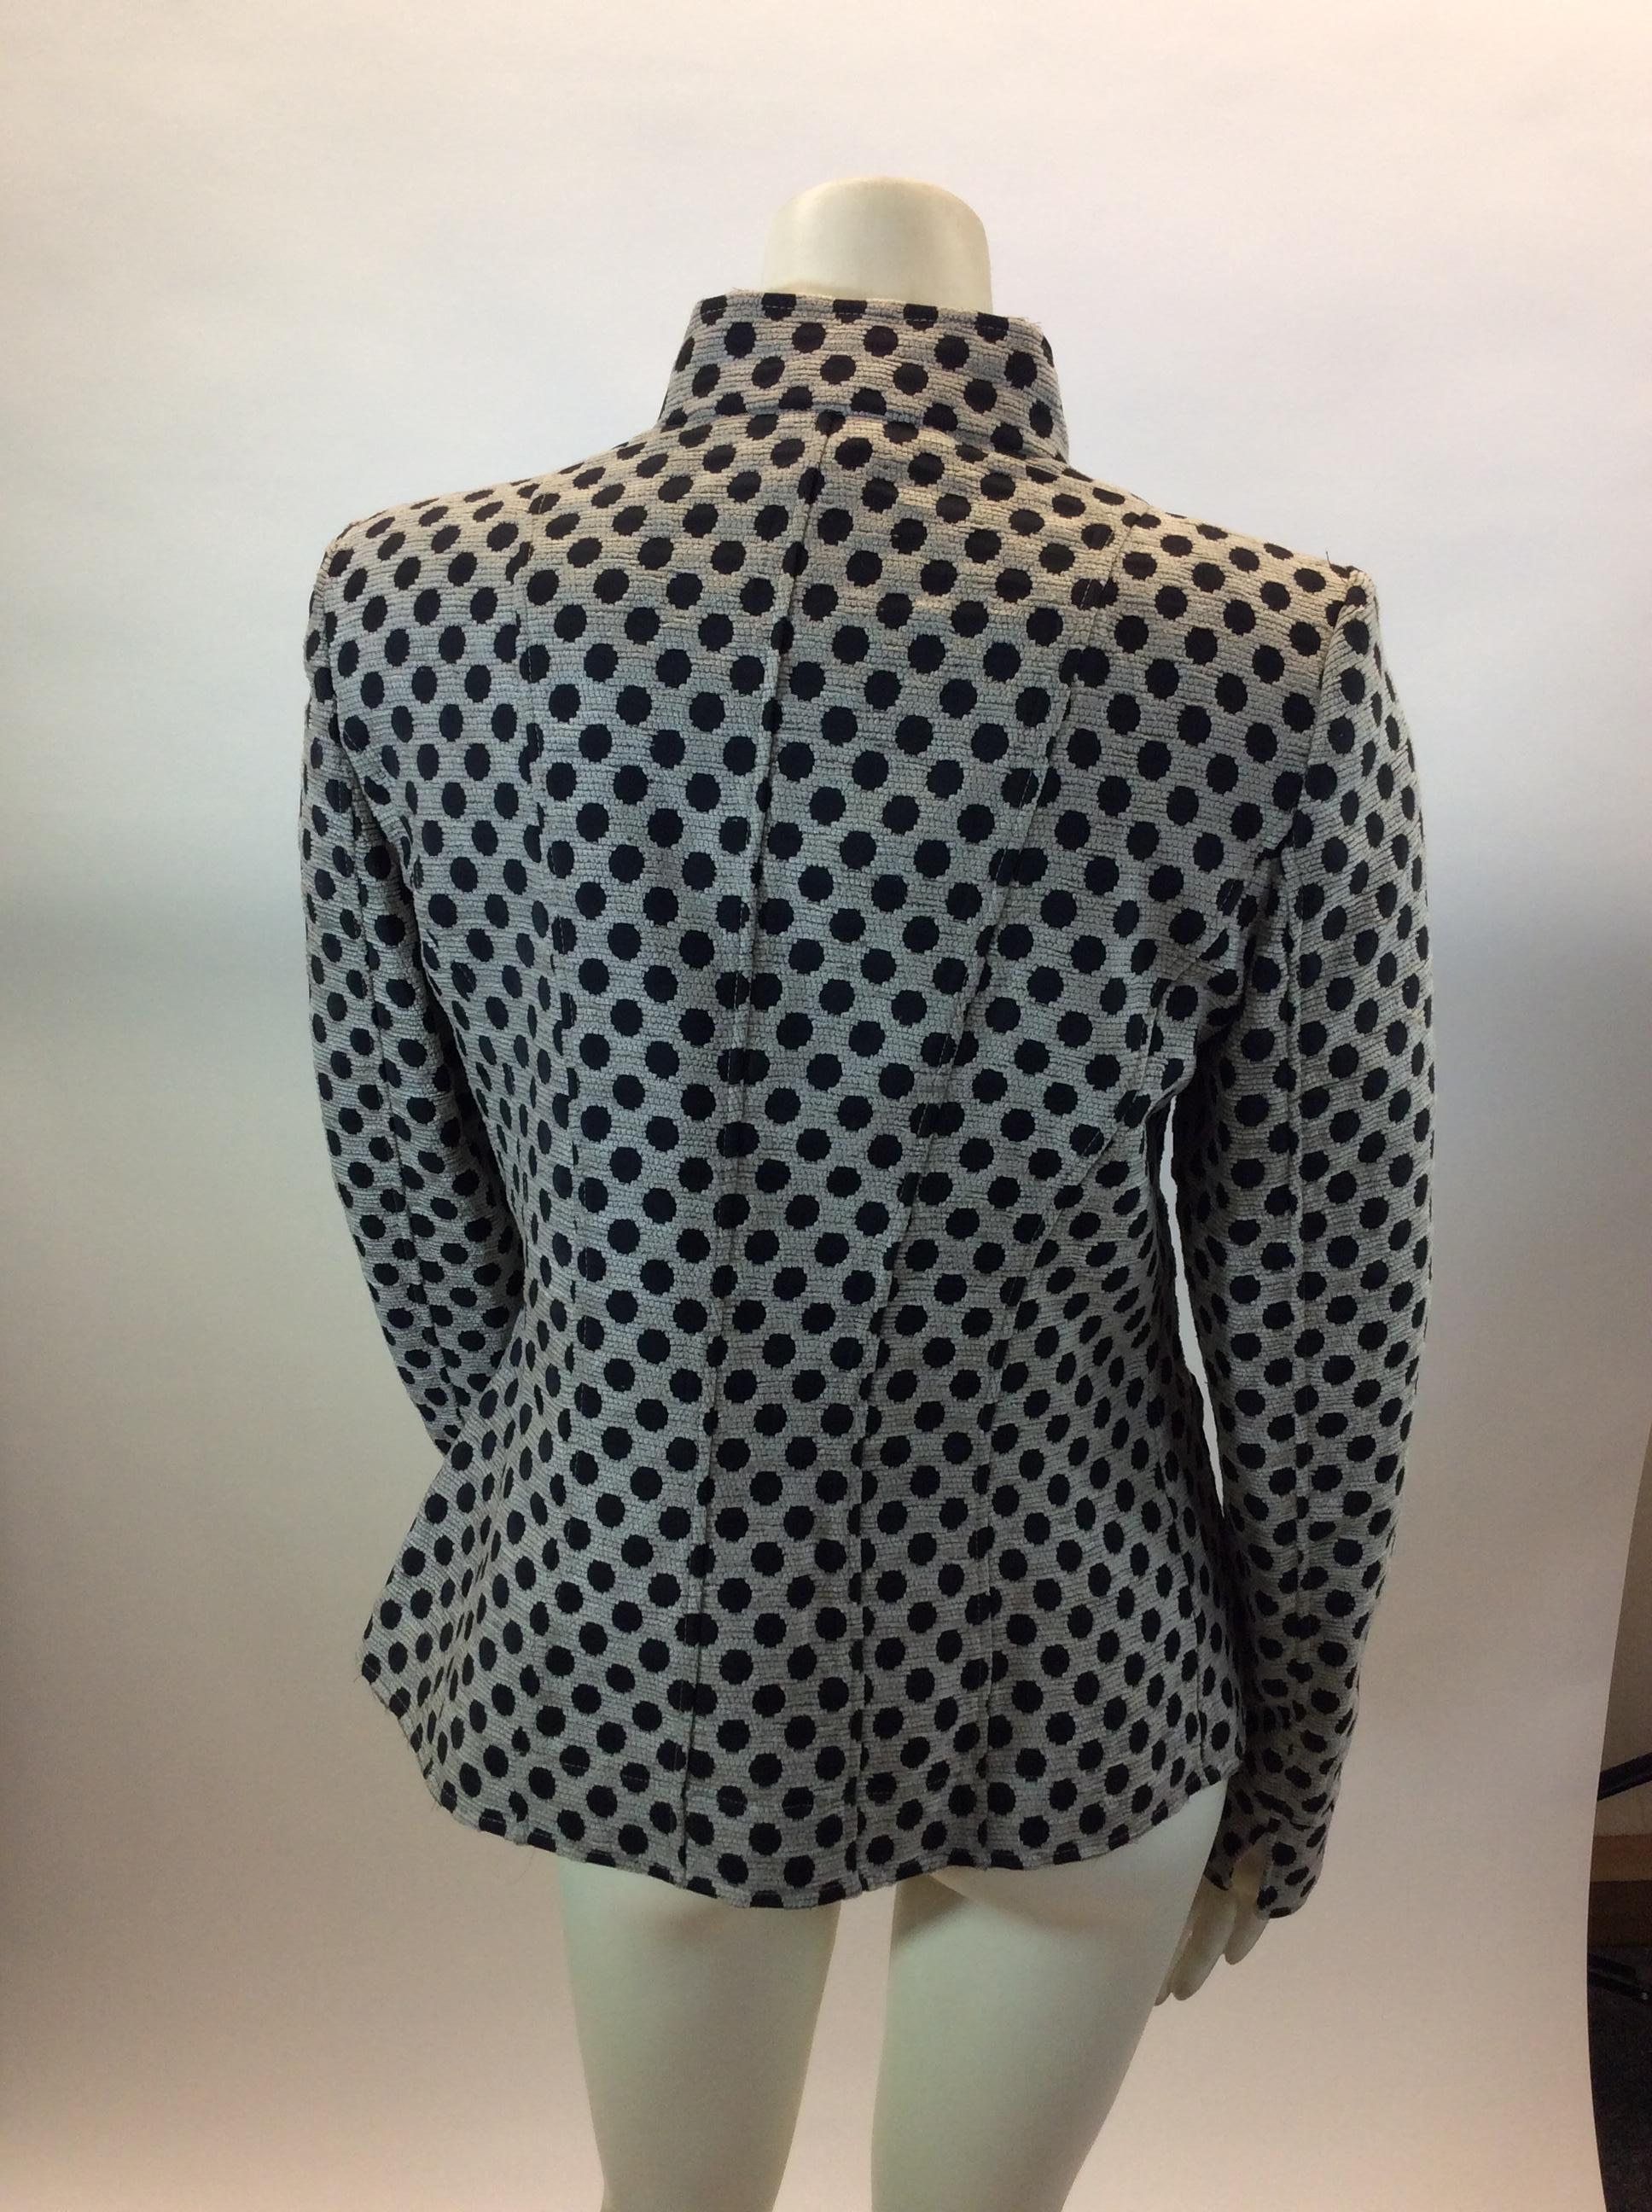 Armani Collezioni Tan and Black Polka Dot Jacket In Excellent Condition For Sale In Narberth, PA